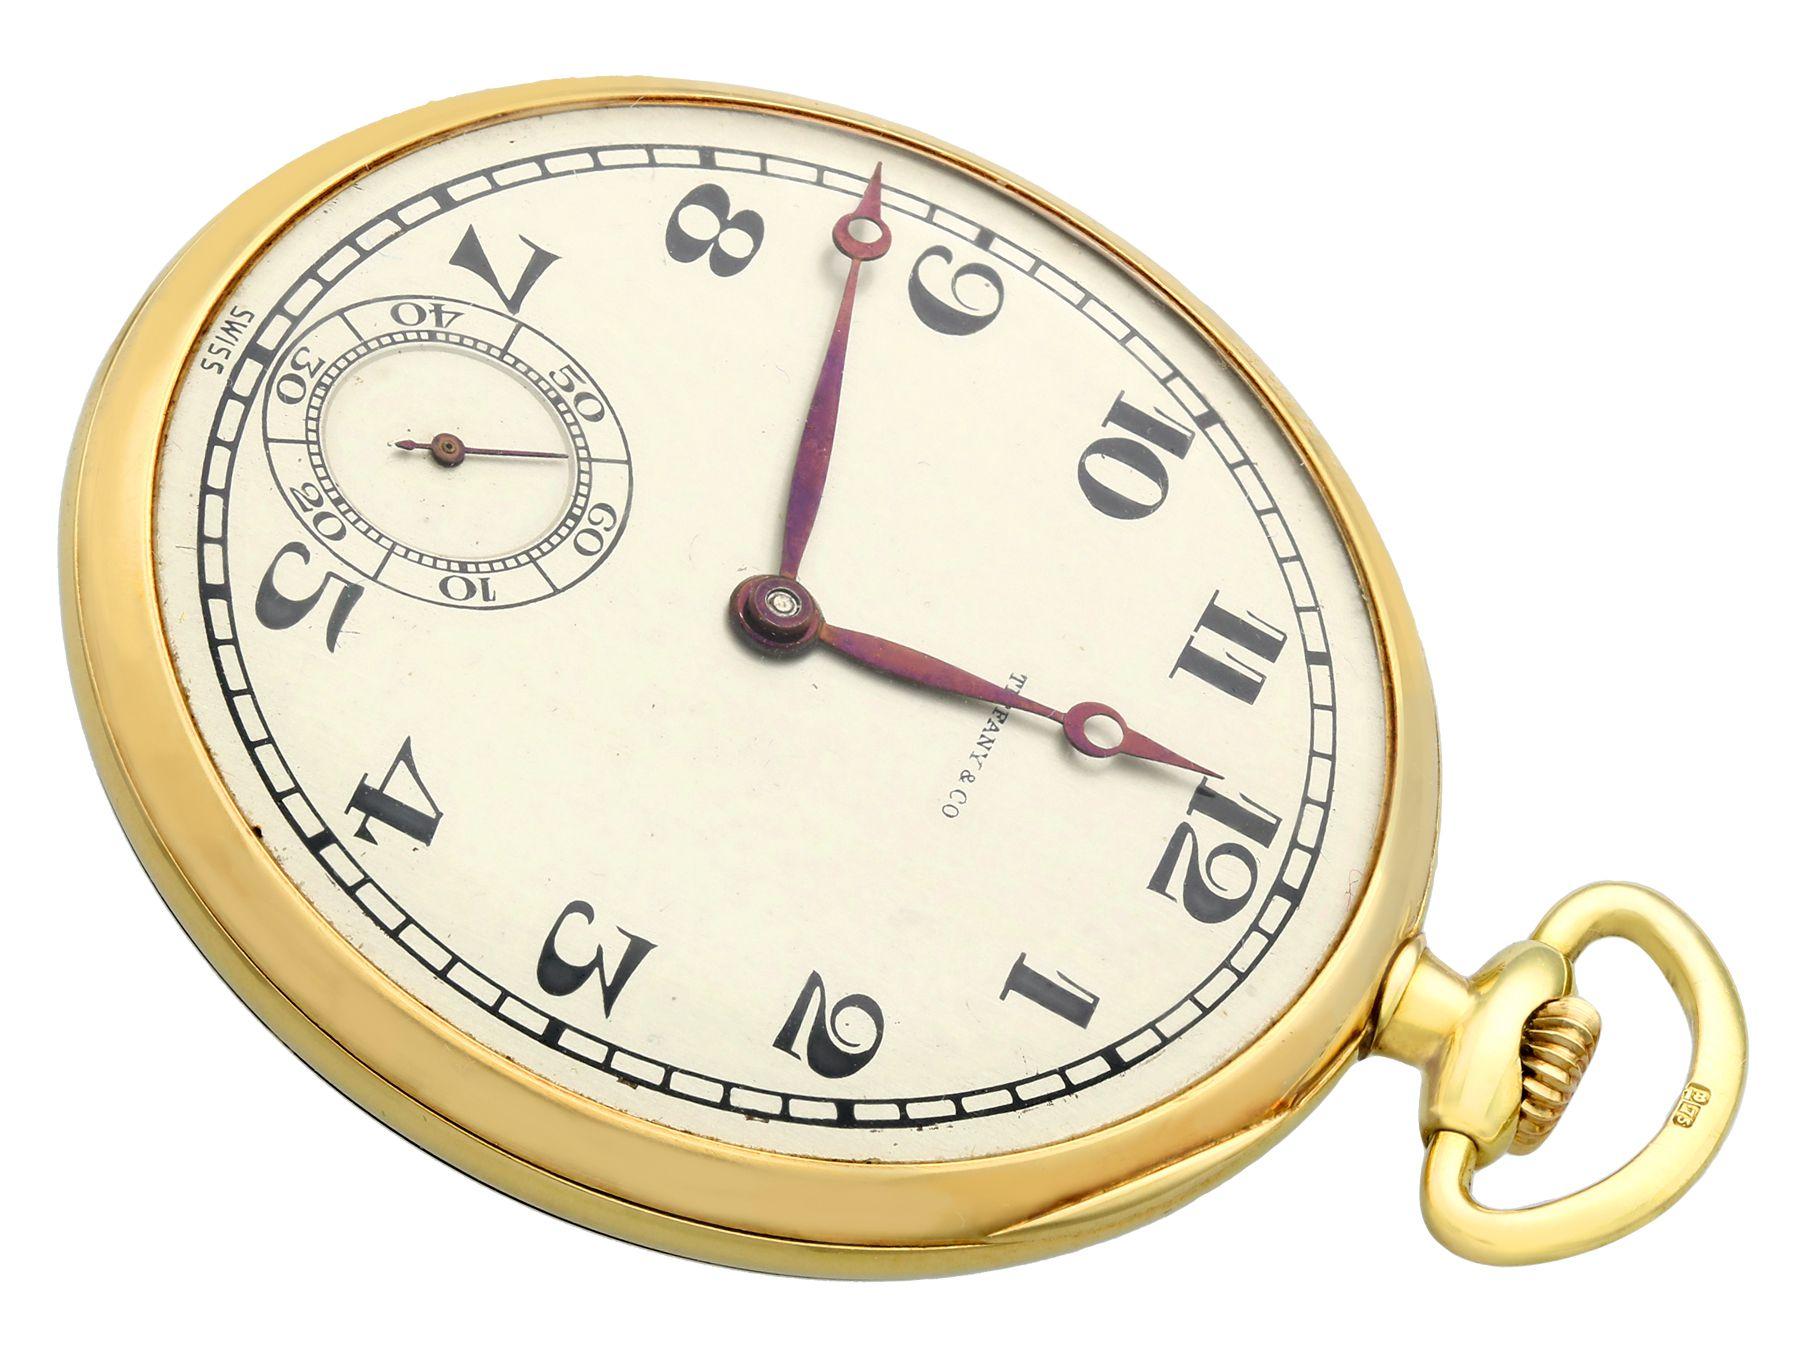 A stunning antique 18 karat yellow gold open-face pocket watch by Tiffany & Co.; part of our diverse antique jewellery and estate jewelry collections.

This fine and impressive open-face gold pocket watch has been crafted in 18k yellow gold.

The